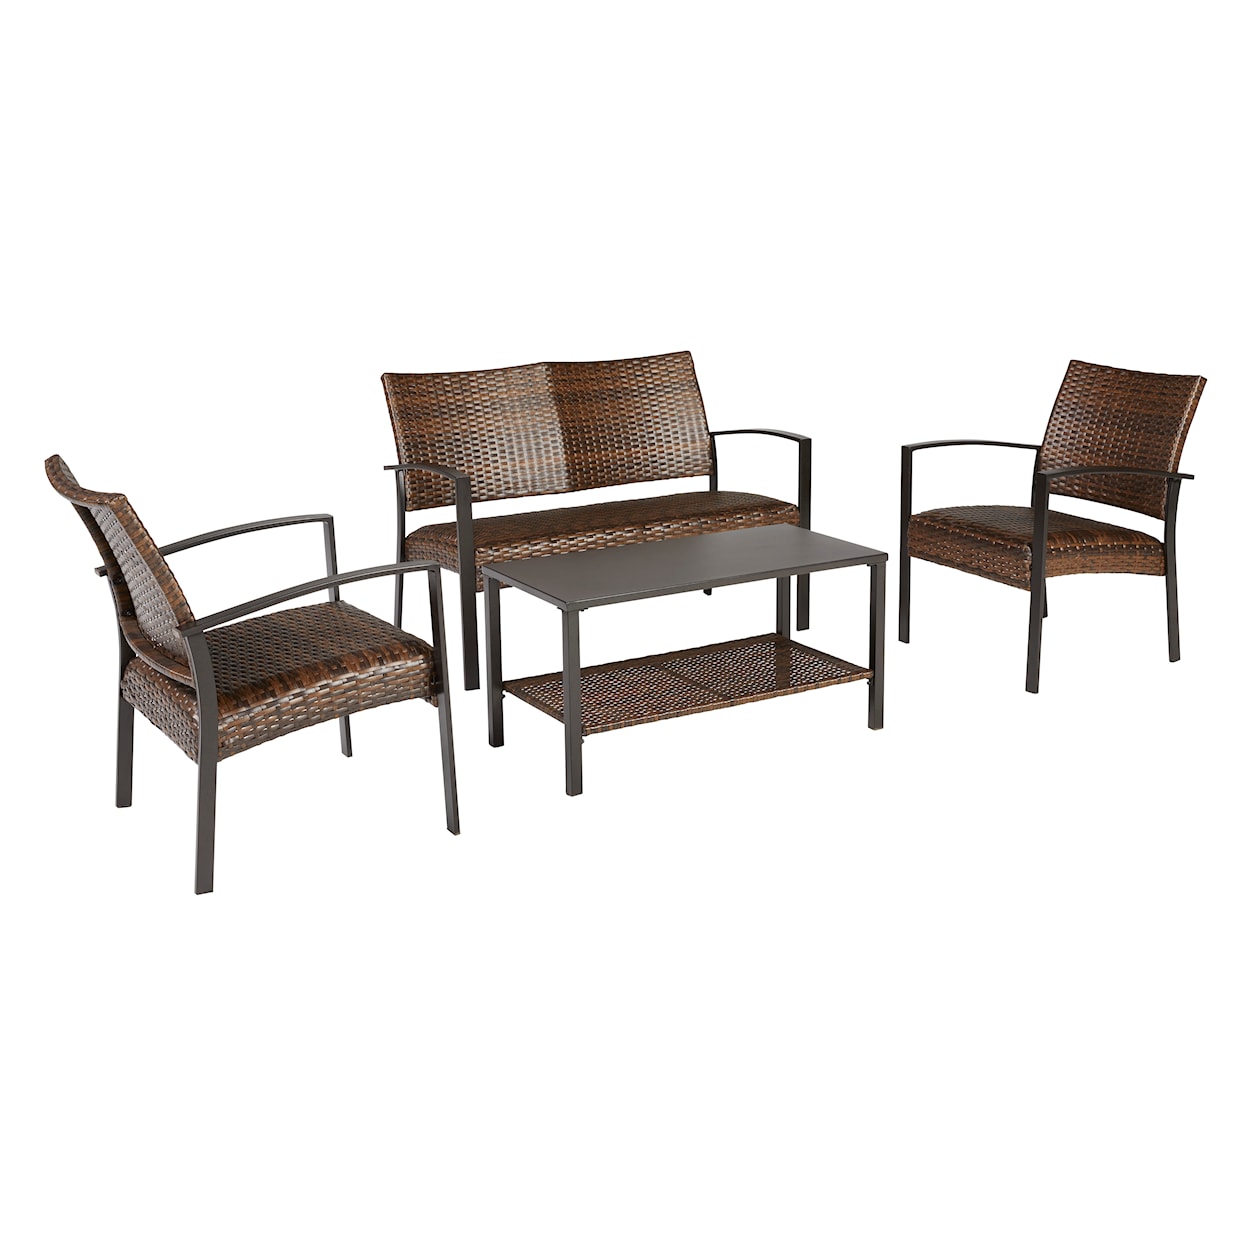 Signature Design by Ashley Zariyah Loveseat/Chairs/Table Set (Set of 4)